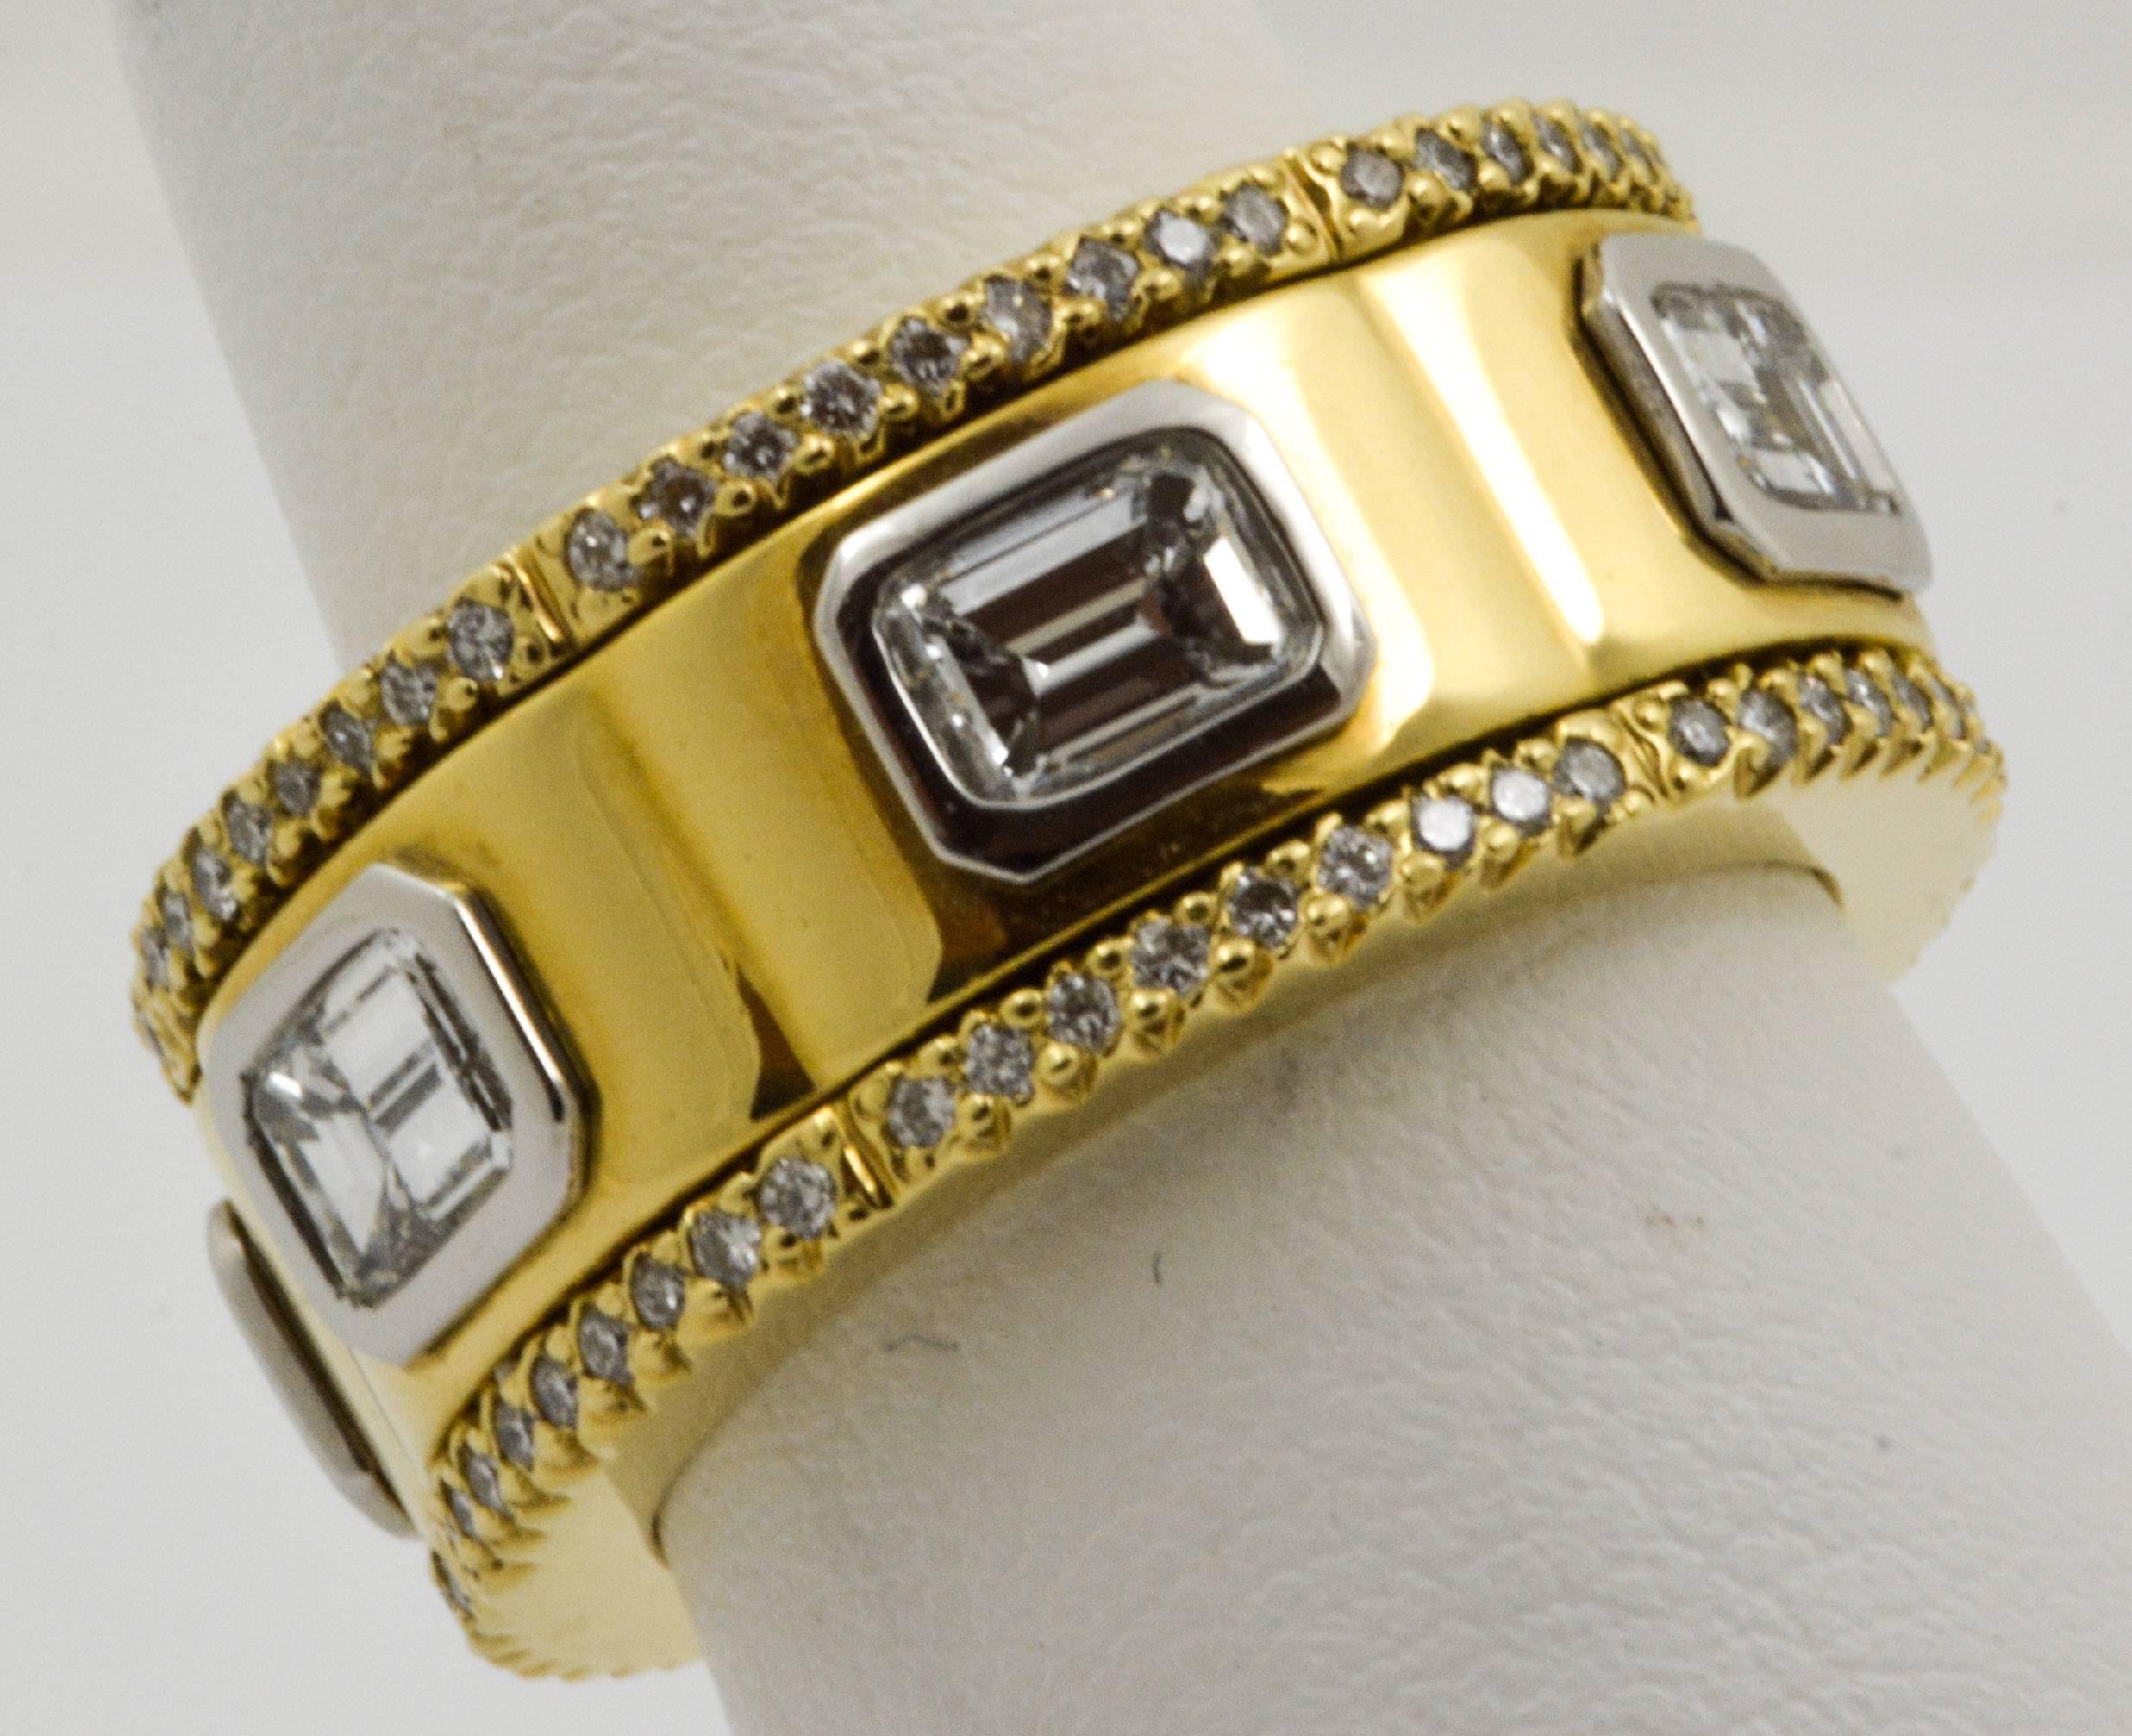 This beautiful Michael B 18 karat yellow gold and platinum diamond band is bezel-set with six emerald-cut diamonds that have an approximate total weight of 2.46 carats with G-H color and VS clarity. The band features a bolt style design, and its